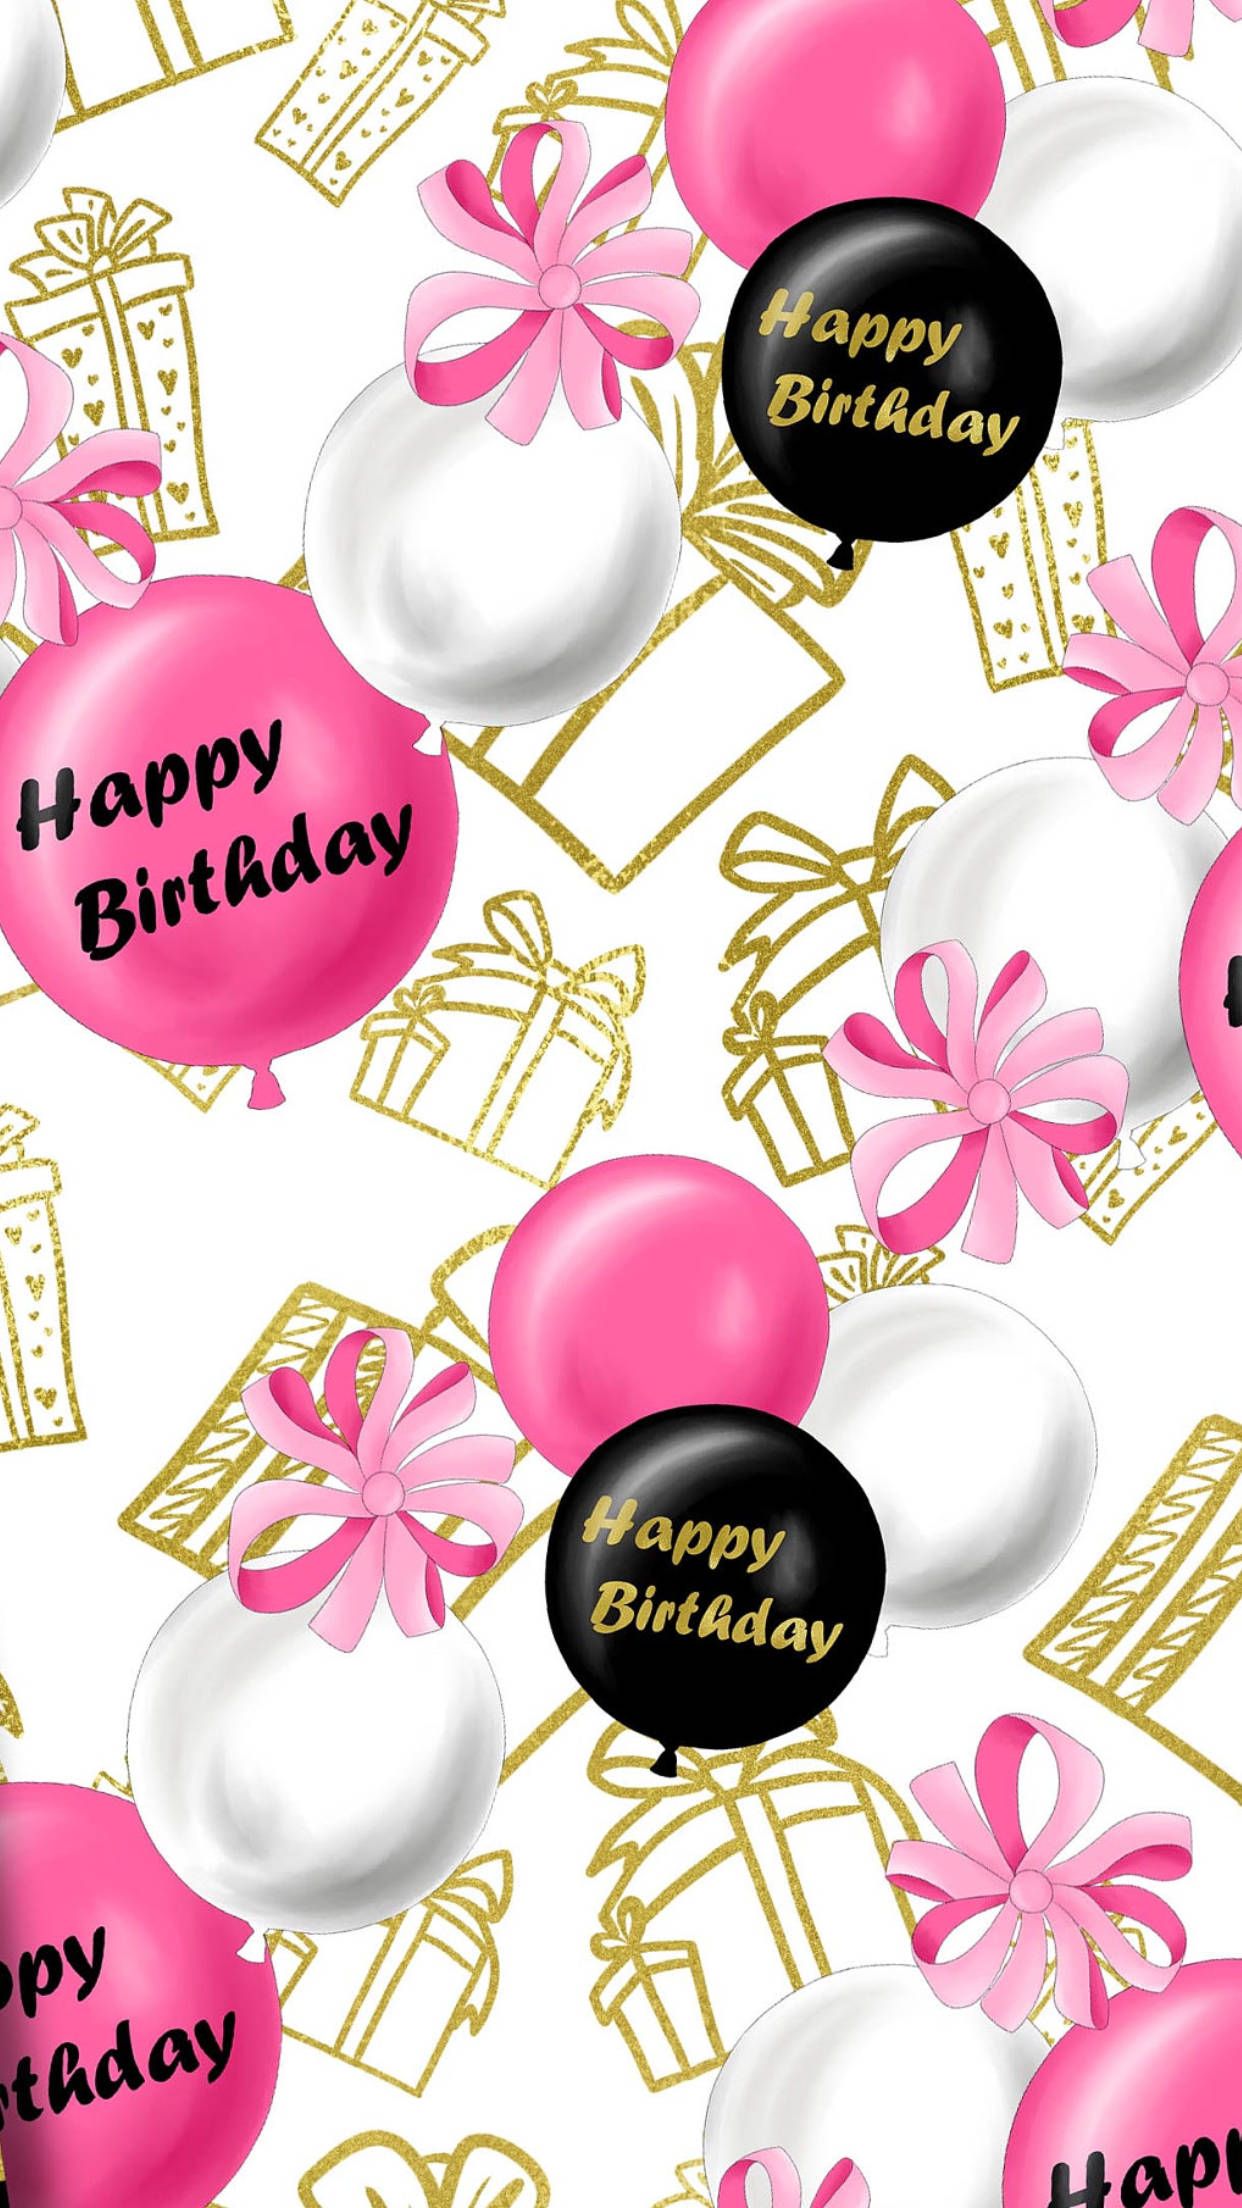 A pattern of pink, black and white balloons, presents and the words 